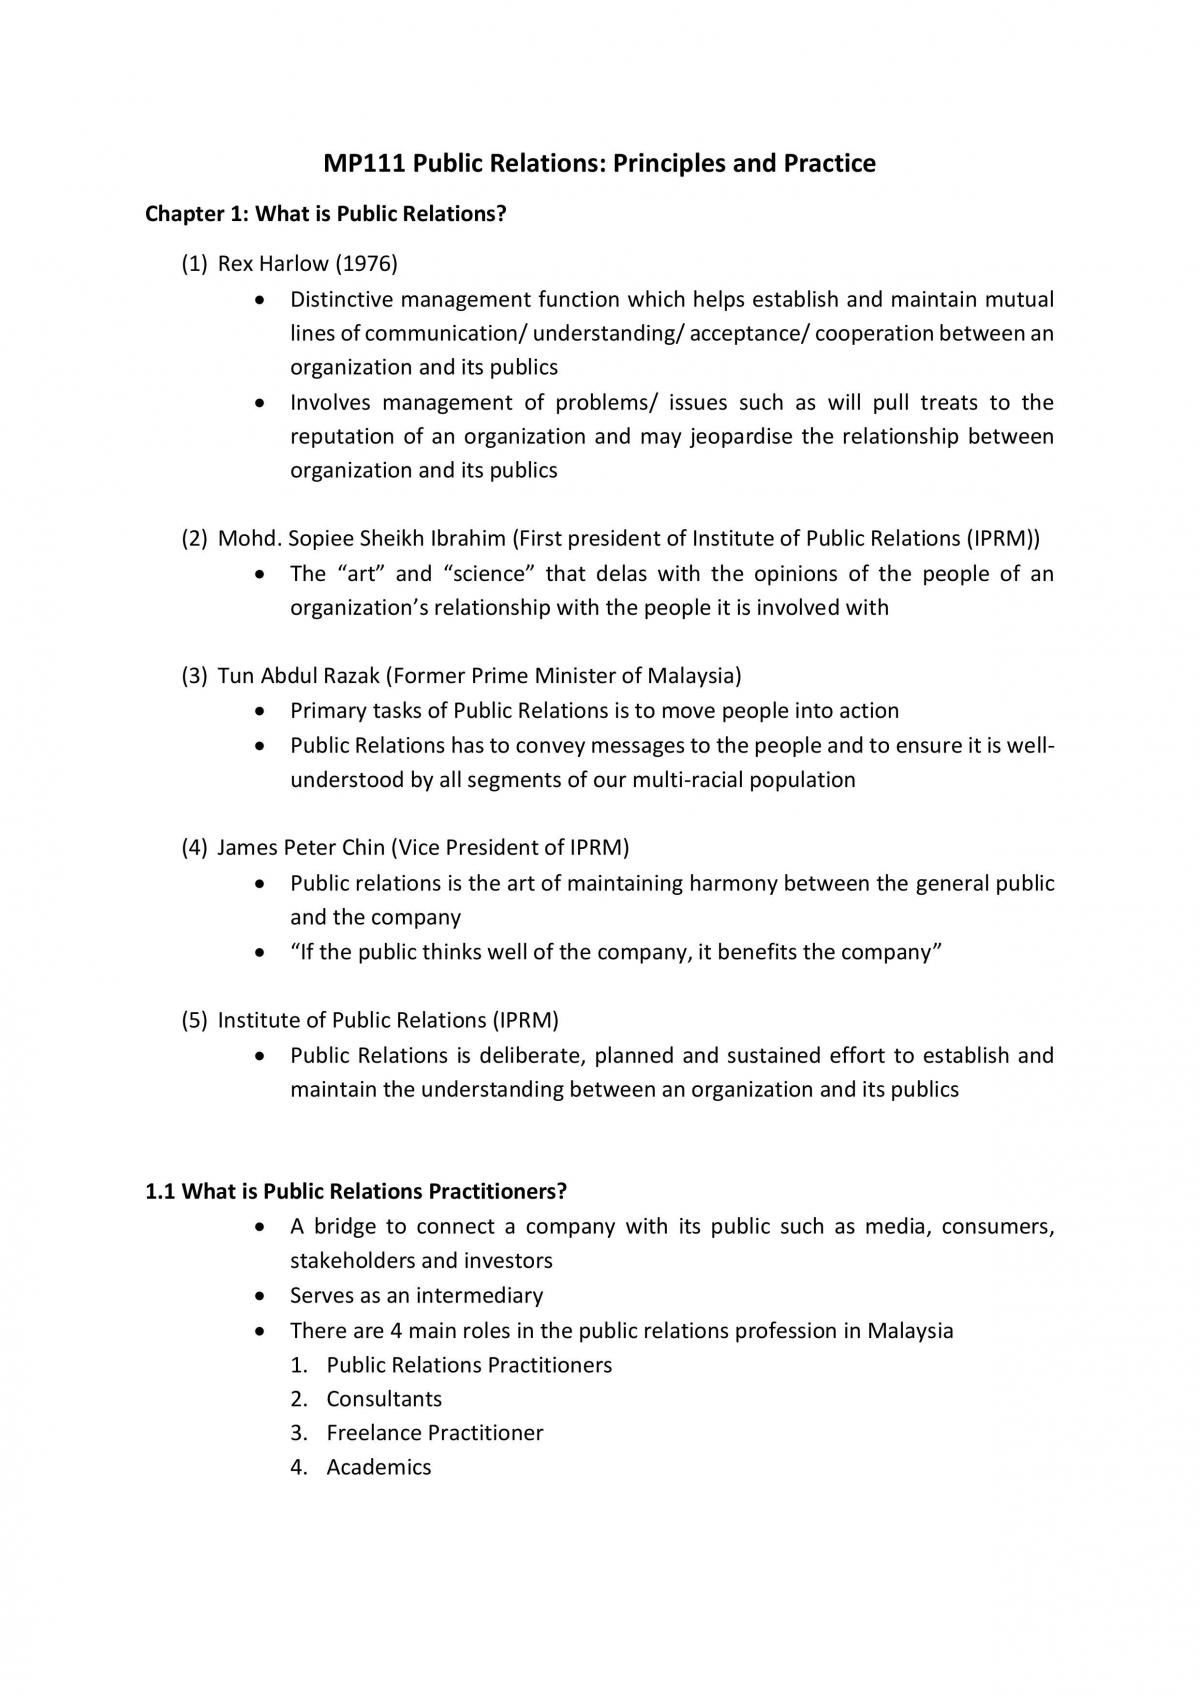 Study Notes on the Principle and Practice of Public Relations  - Page 1